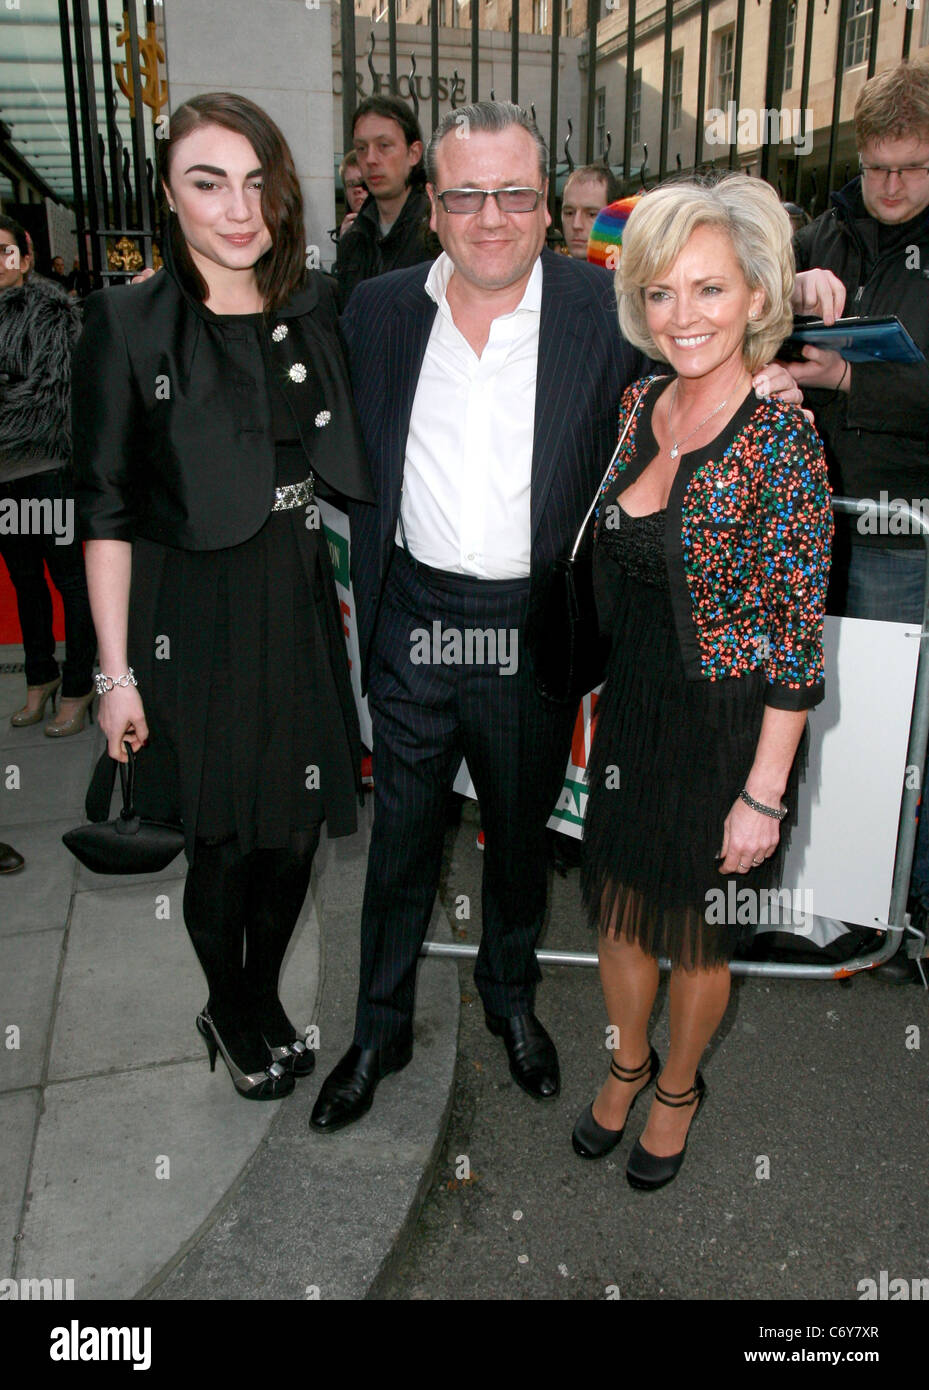 Ray Winstone with his wife Elaine Winstone, and daughter Lois Winstone, The Empire Film Awards 2010 - Outside Arrivals London, Stock Photo